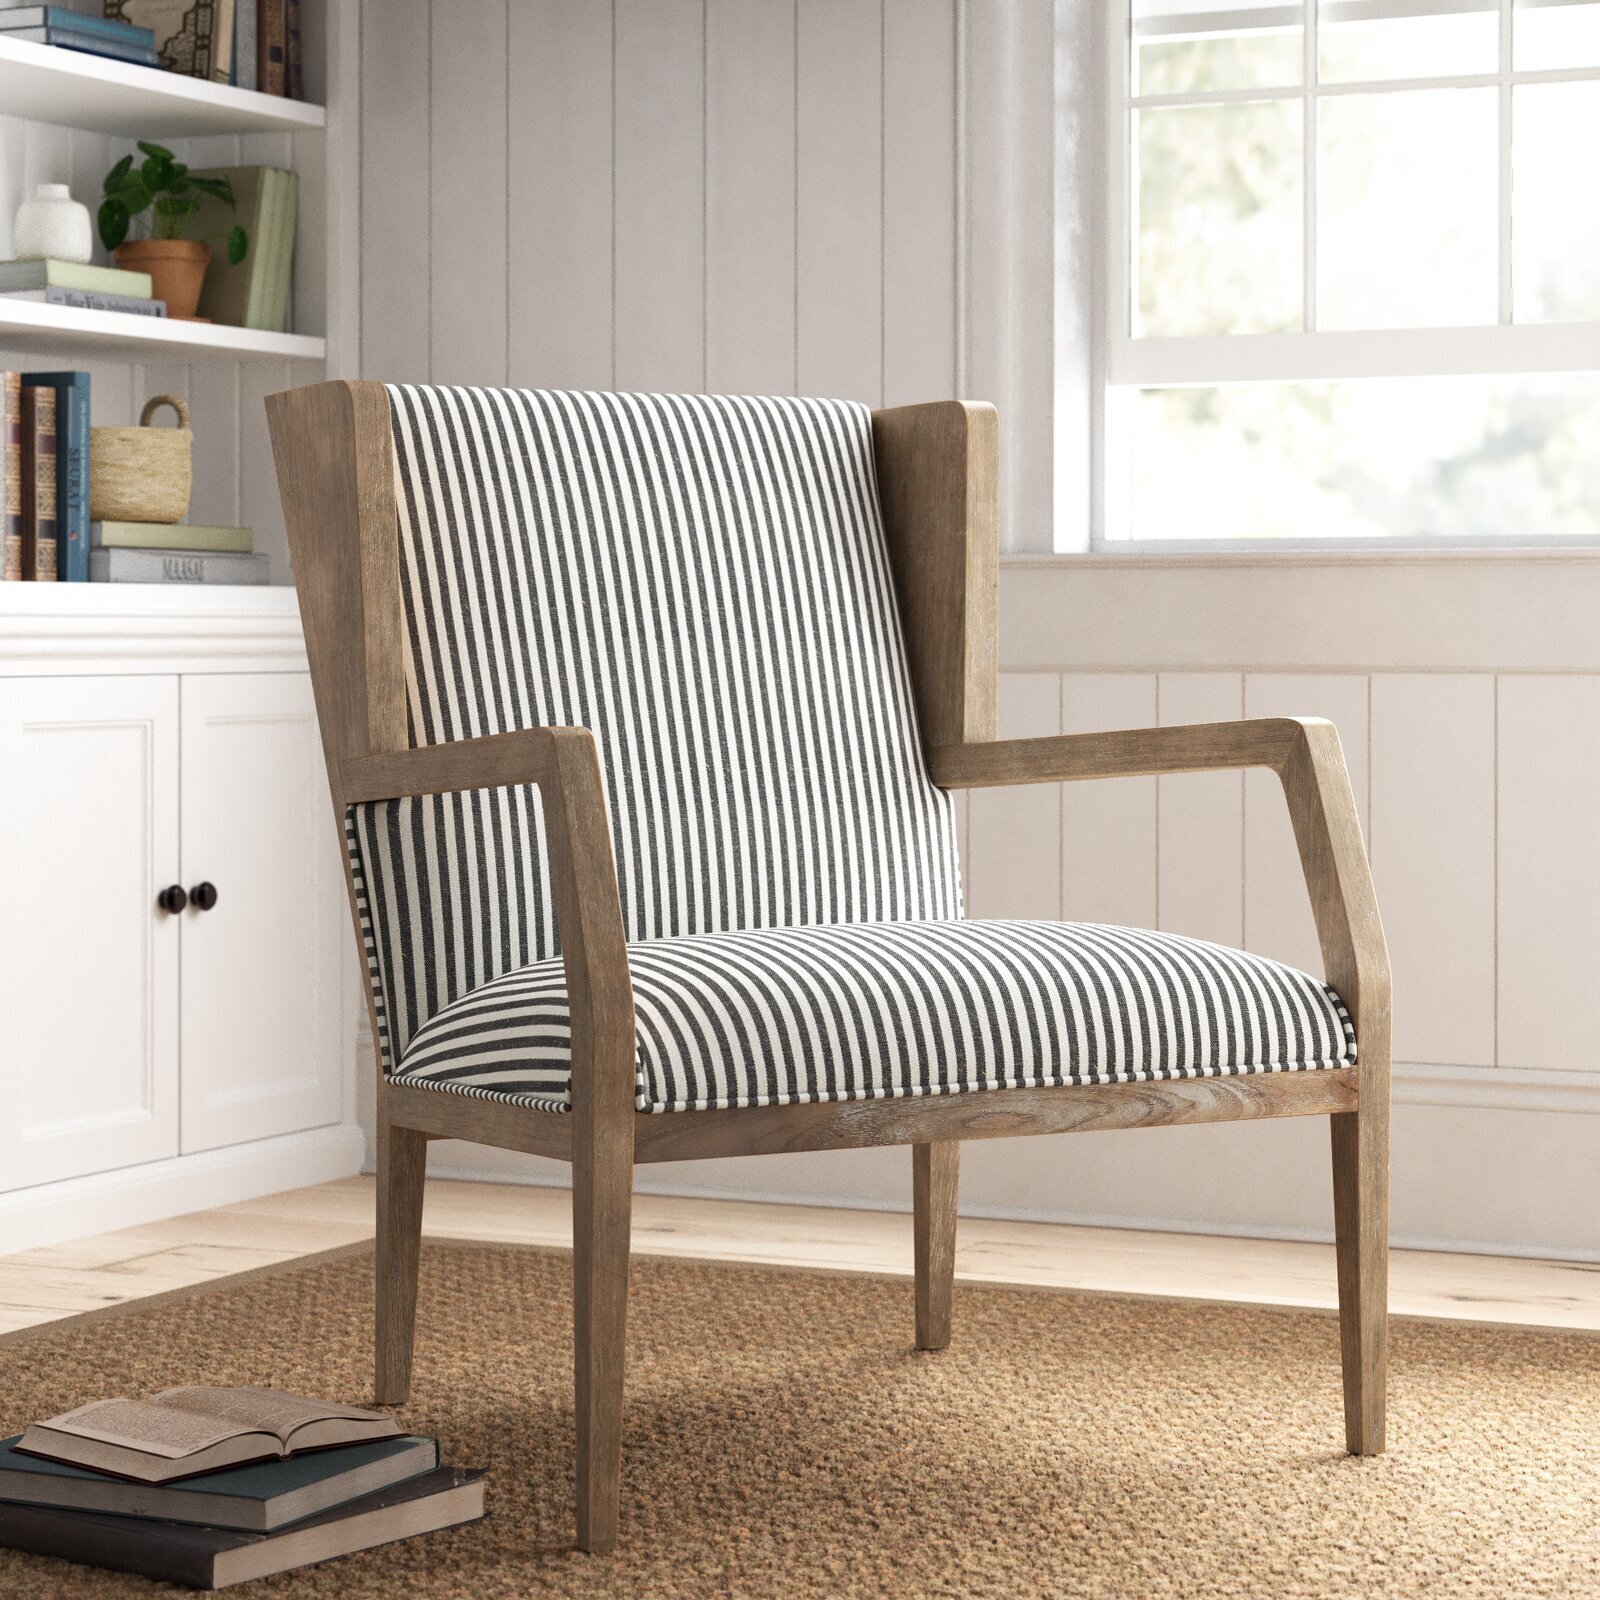 Vintage Inspired Striped Armchair